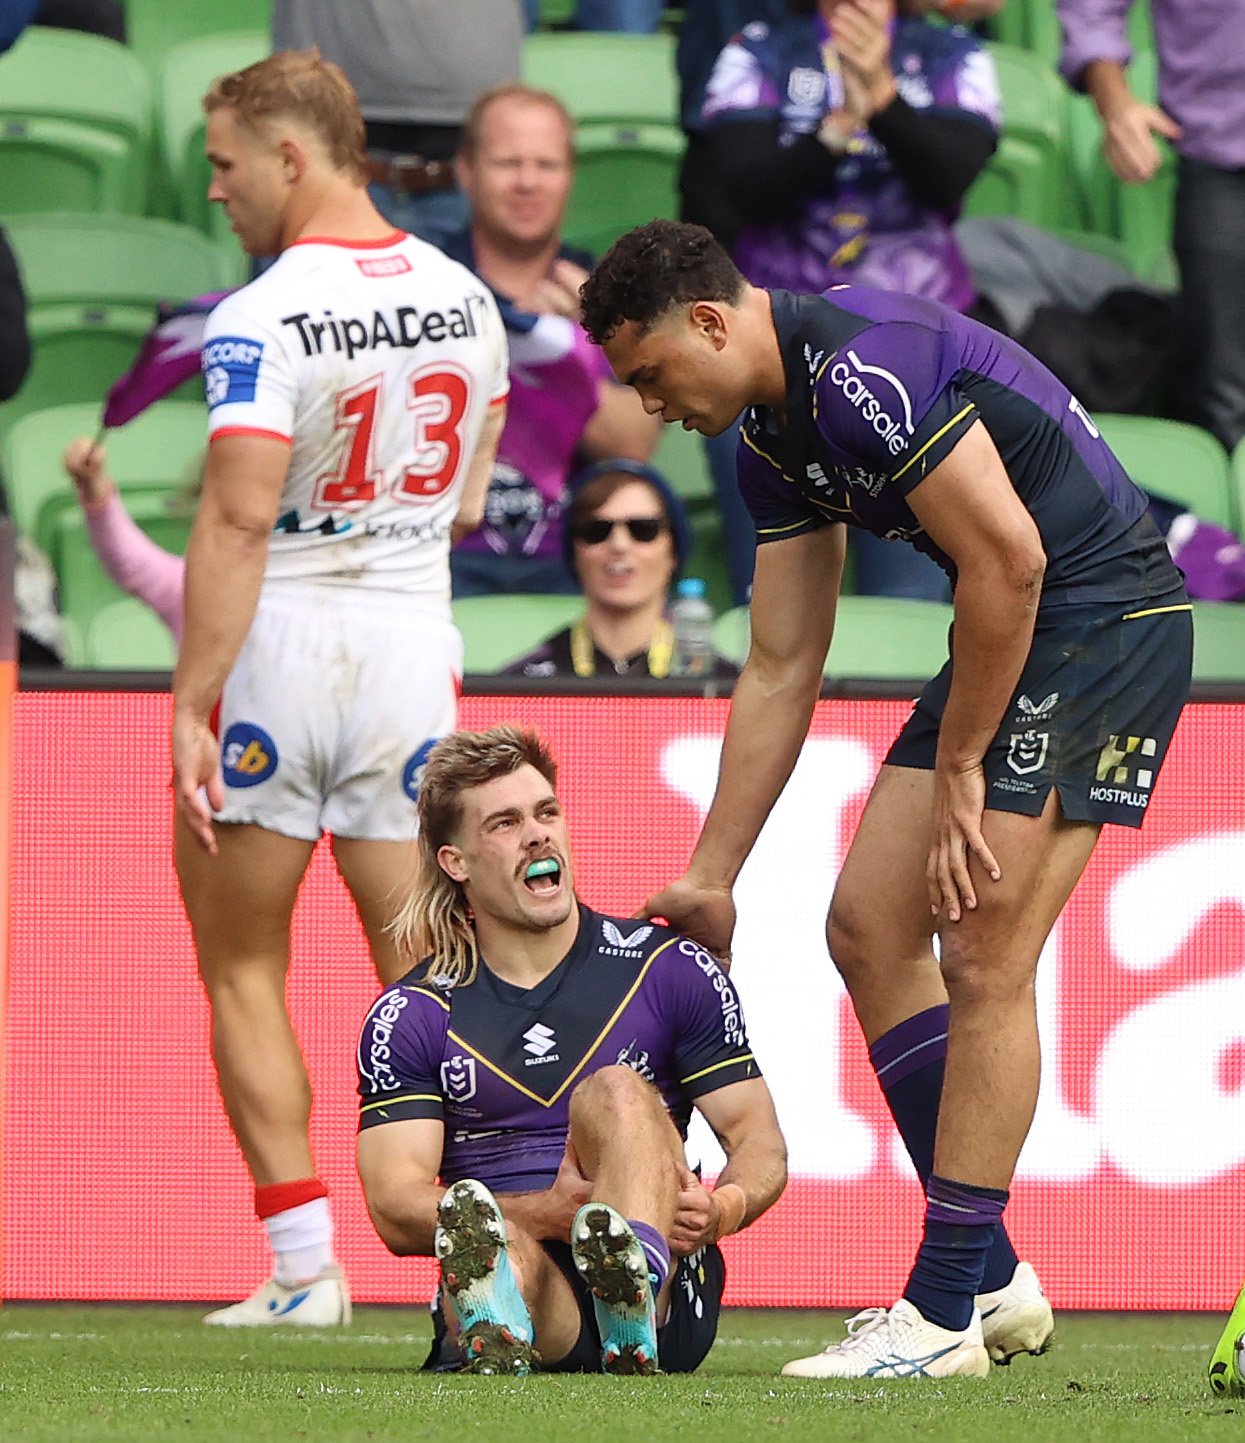 Ryan Papenhuyzen of the Storm is injured after scoring a try against the Dragons.